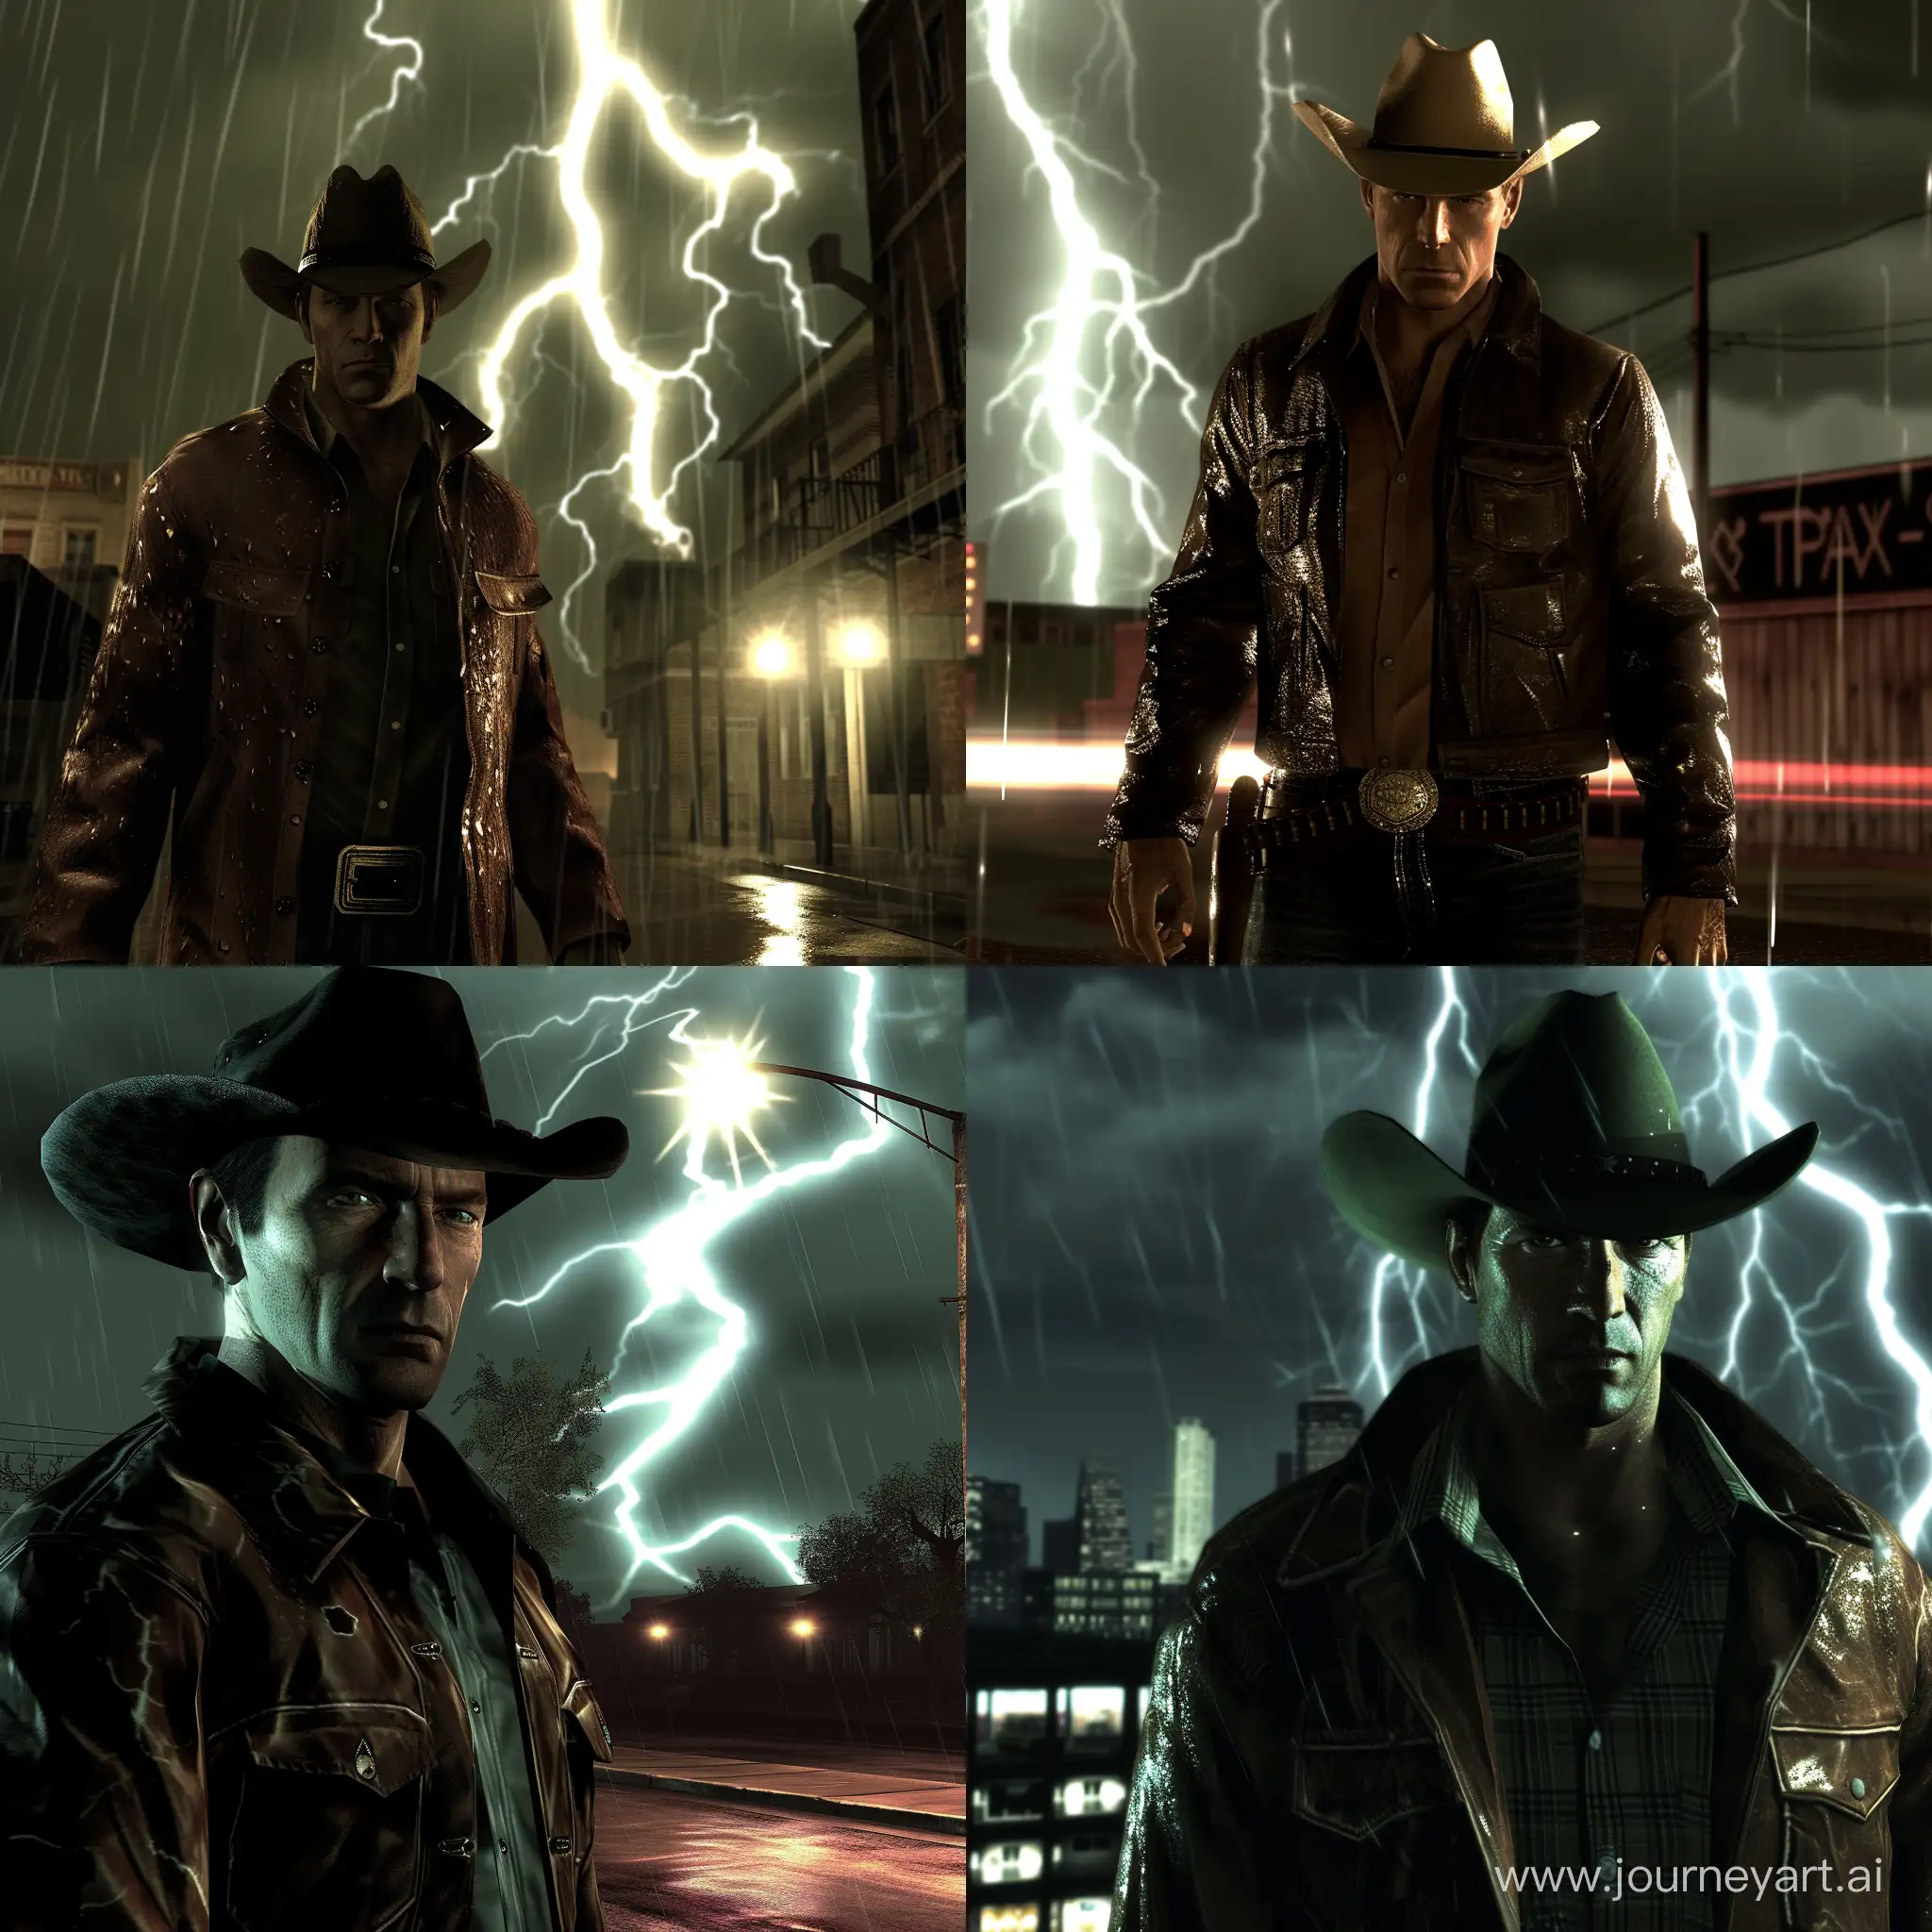 Max payne in Texas with cowboy hat, ps2 screenshot, detailed, dramatic lightning, hd